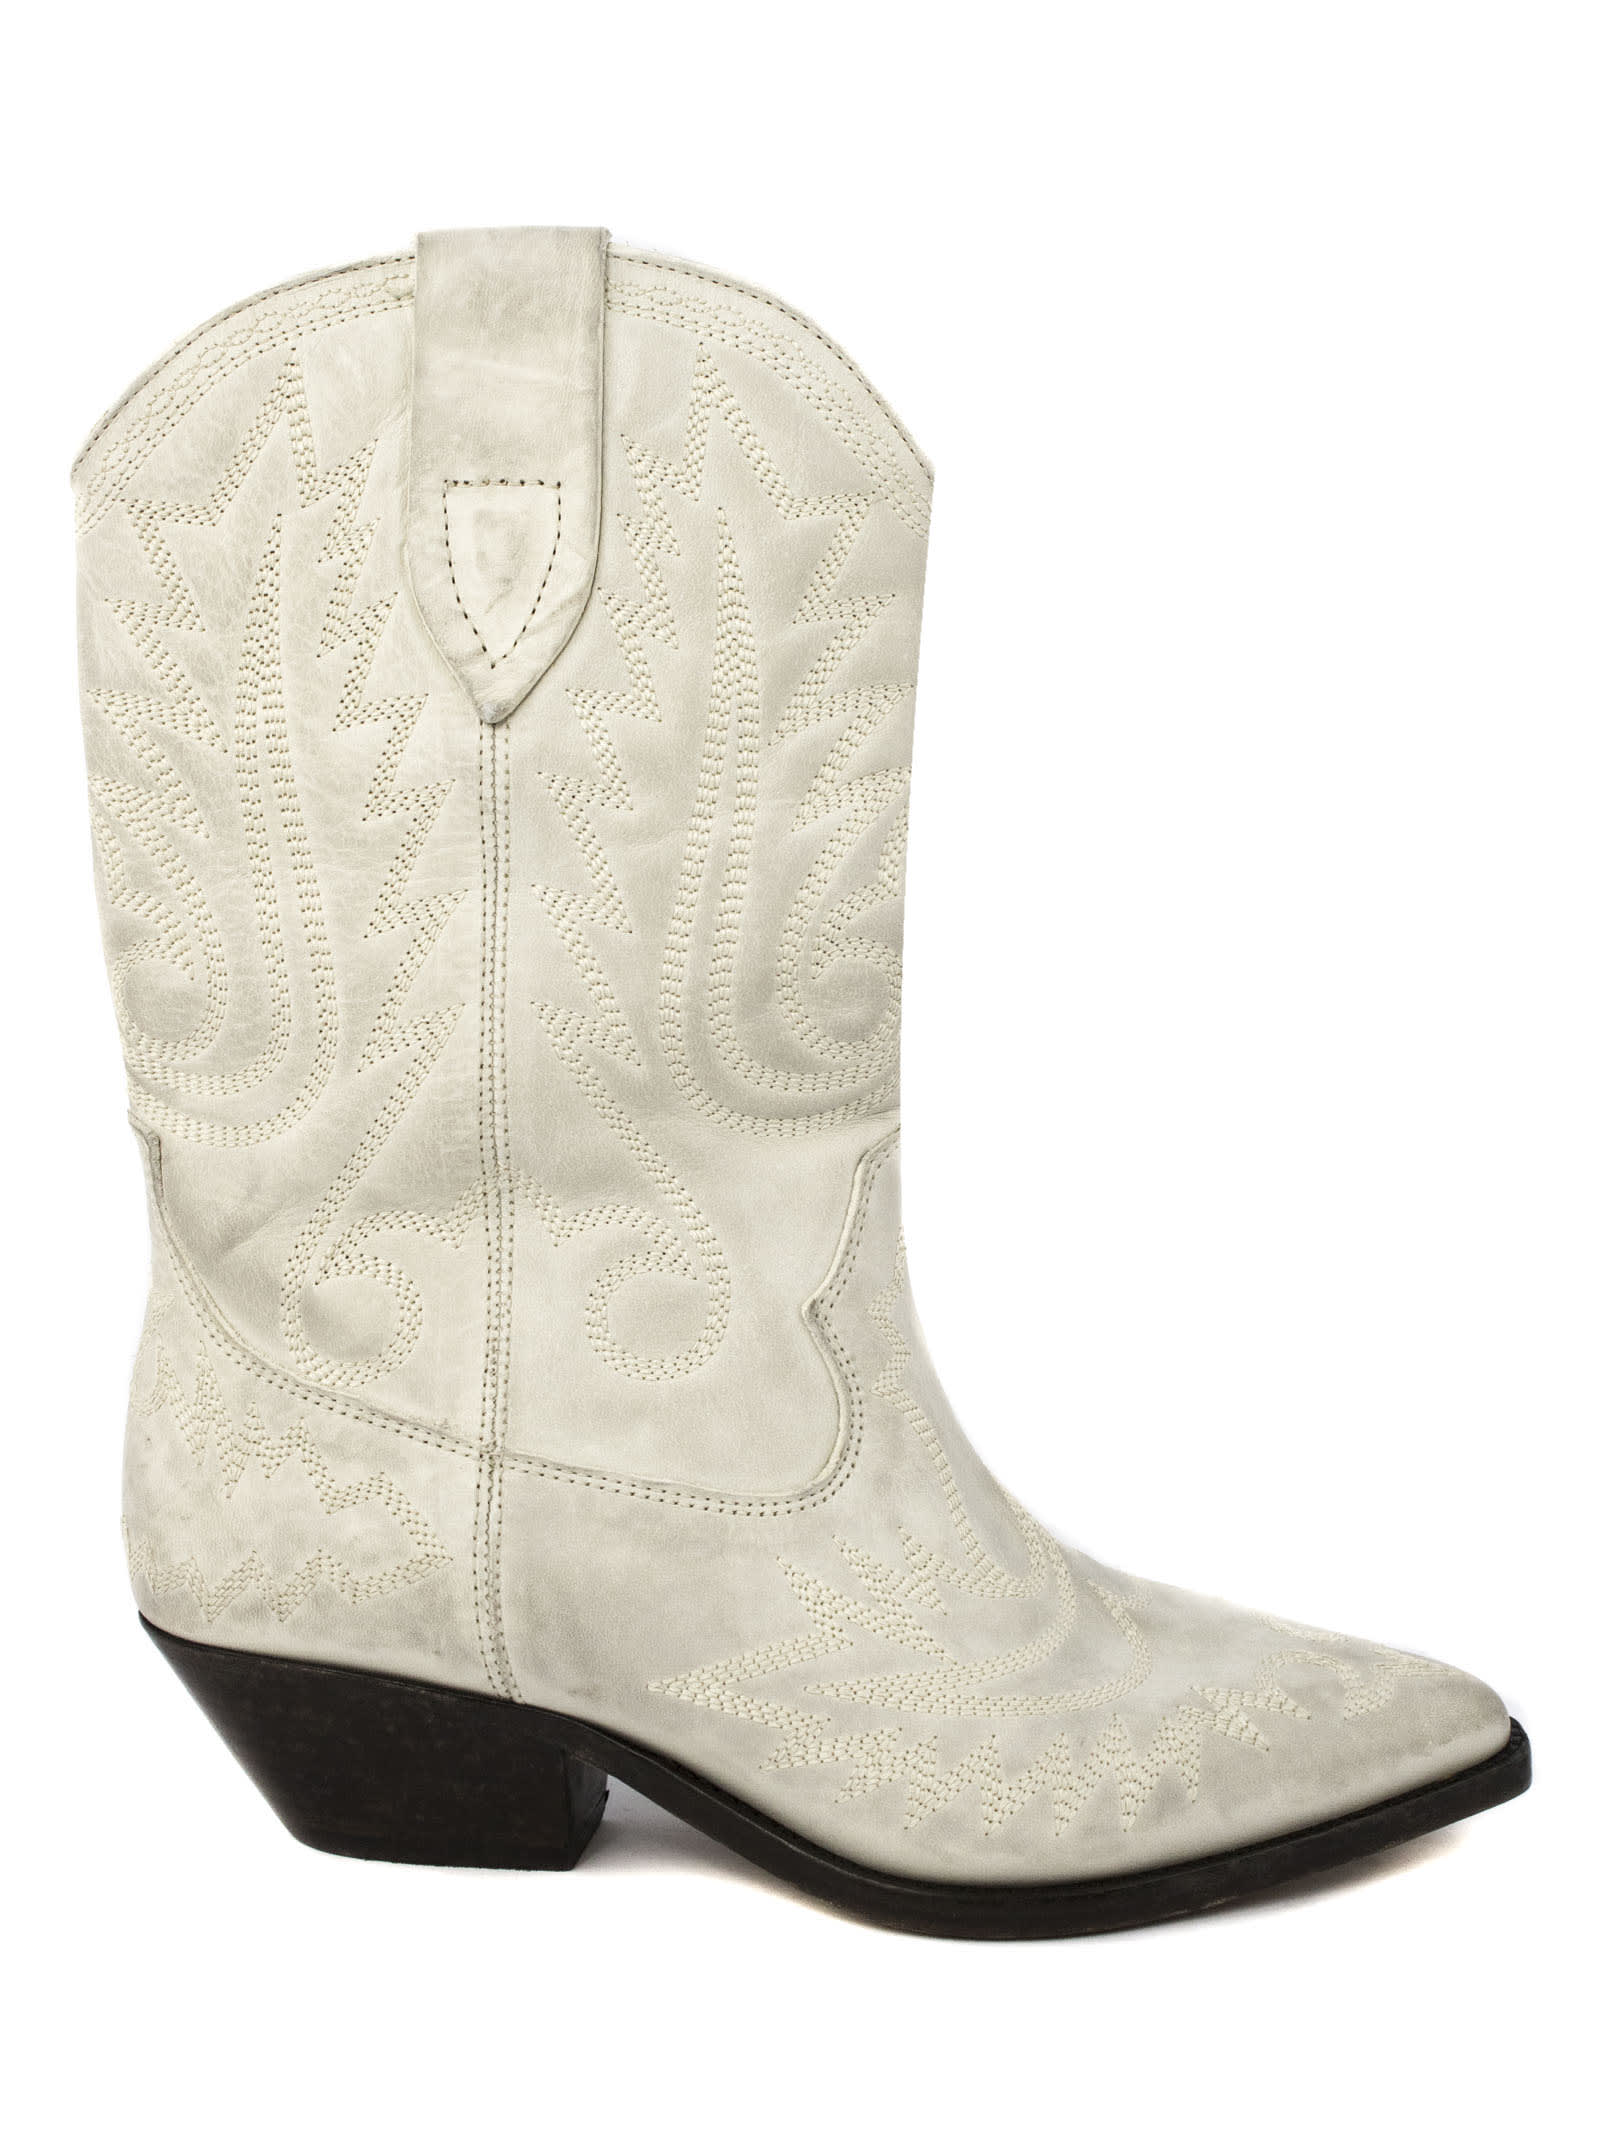 Buy Isabel Marant White Duerto Cowboy Boots online, shop Isabel Marant shoes with free shipping